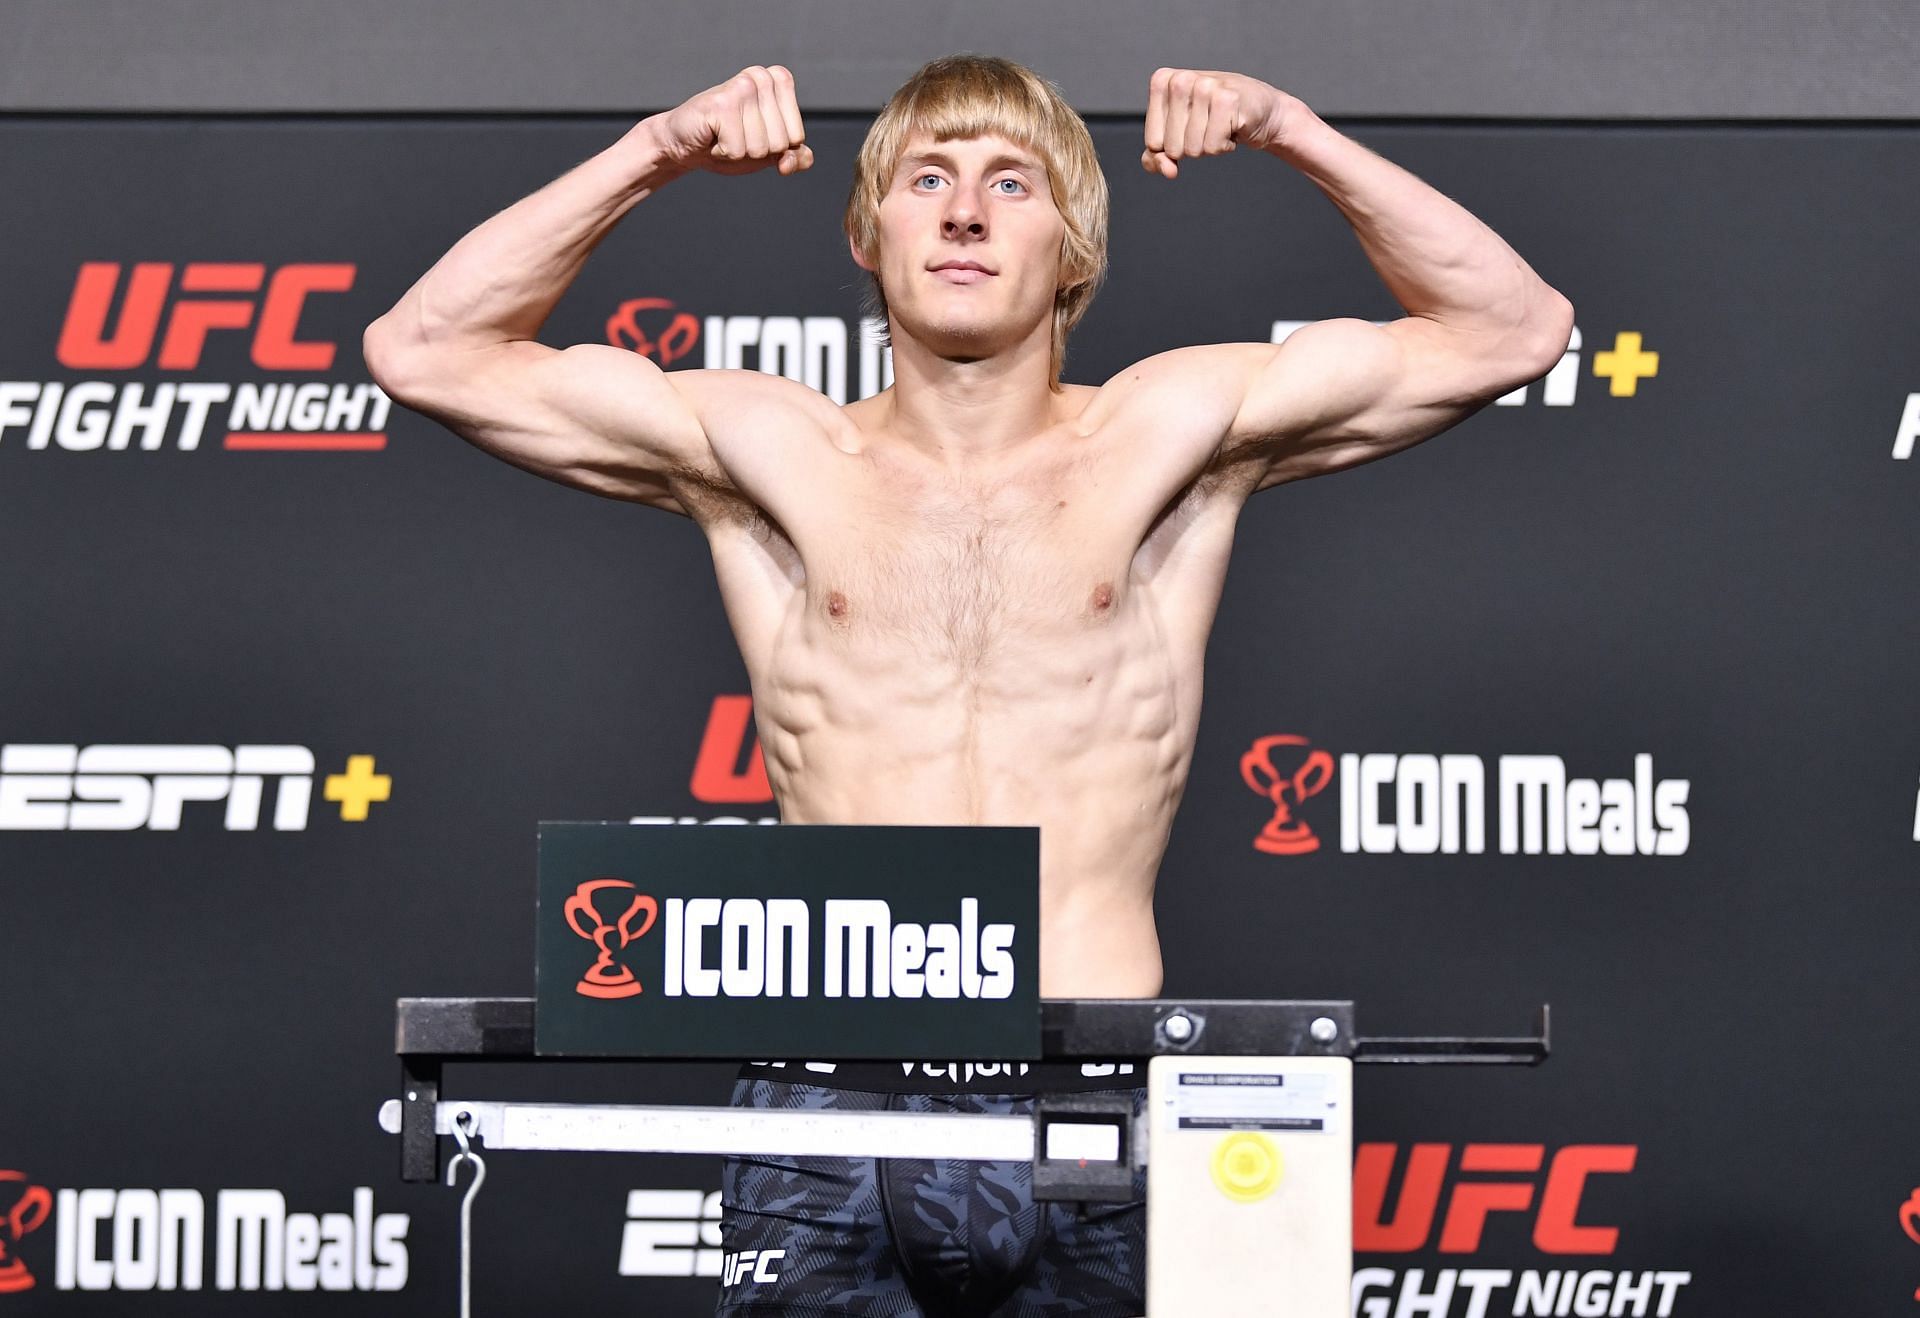 Paddy Pimblett is one of a number of English fighters competing on Saturday